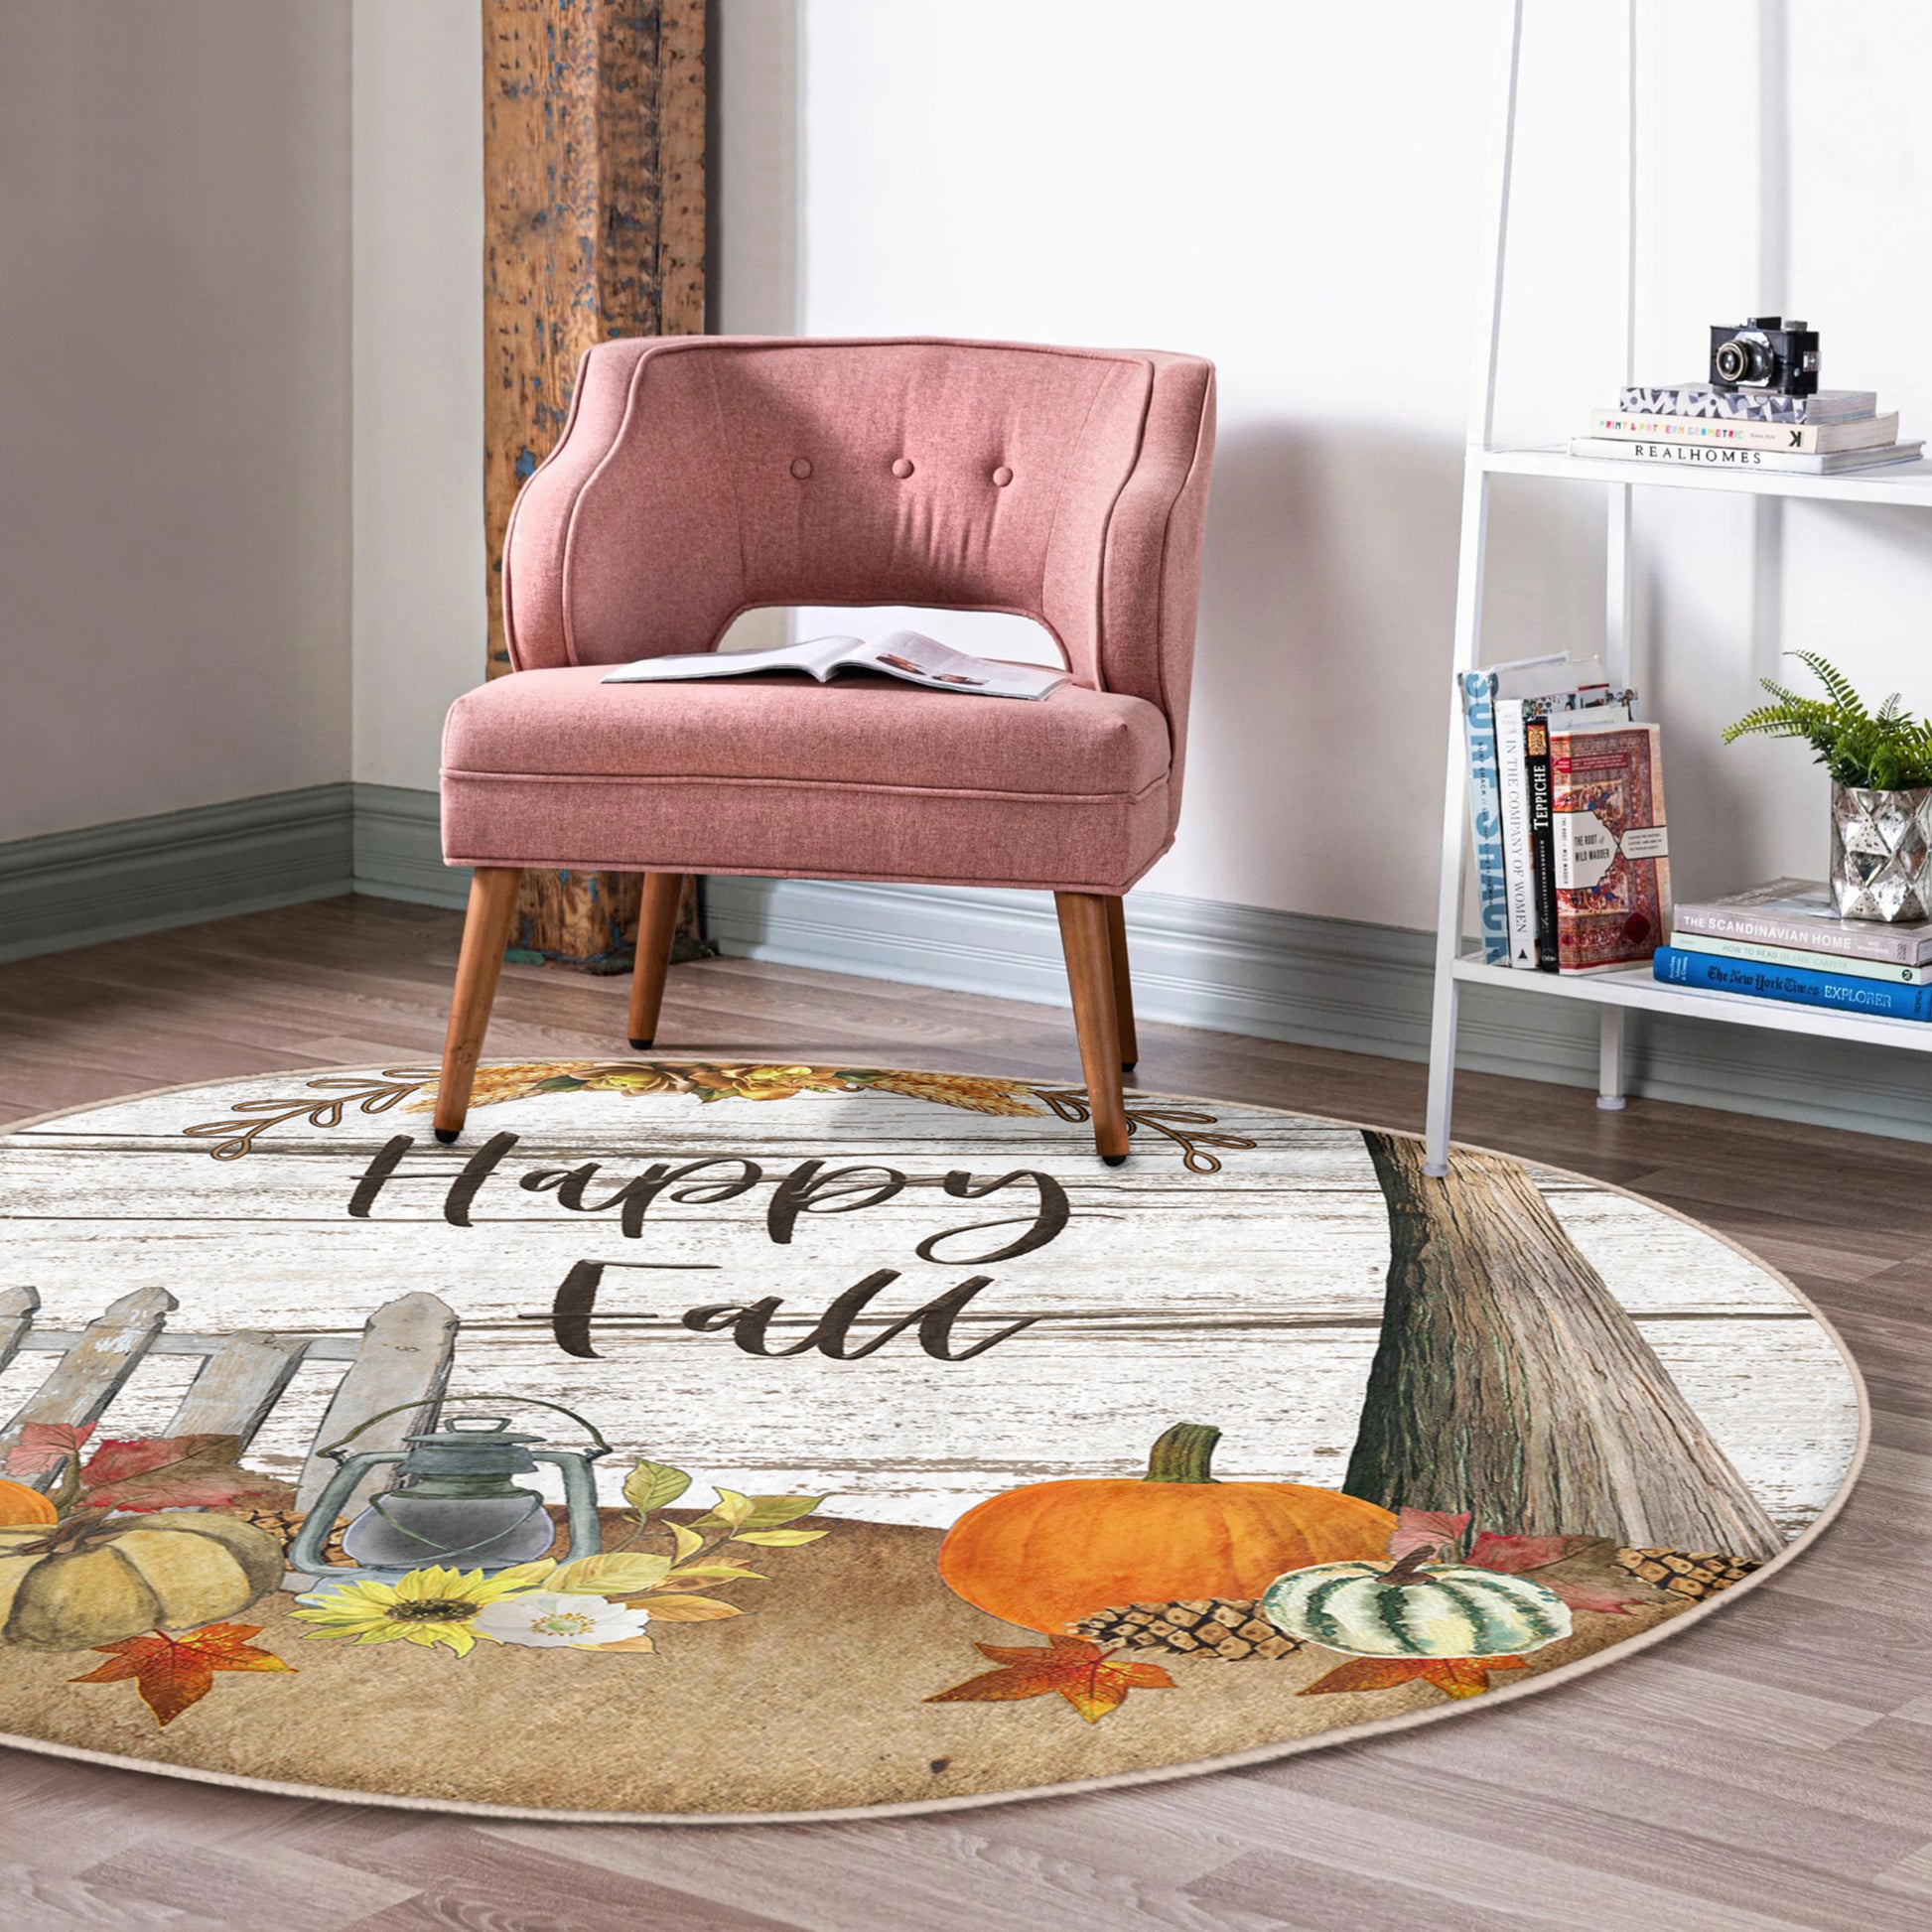 Charming Happy Fall Rug by Homeezone